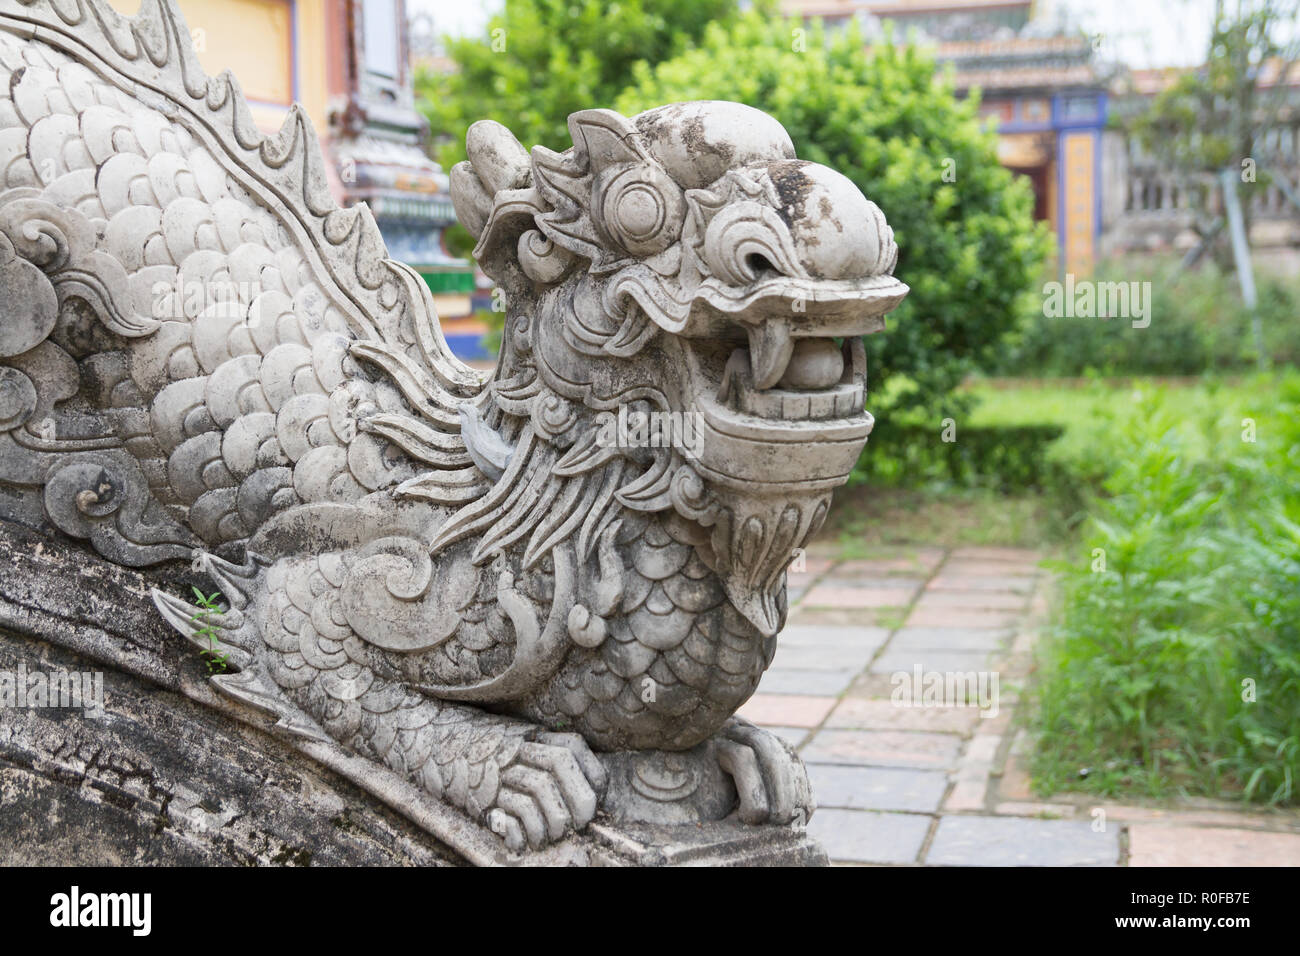 chinese dragon sculpture Stock Photo